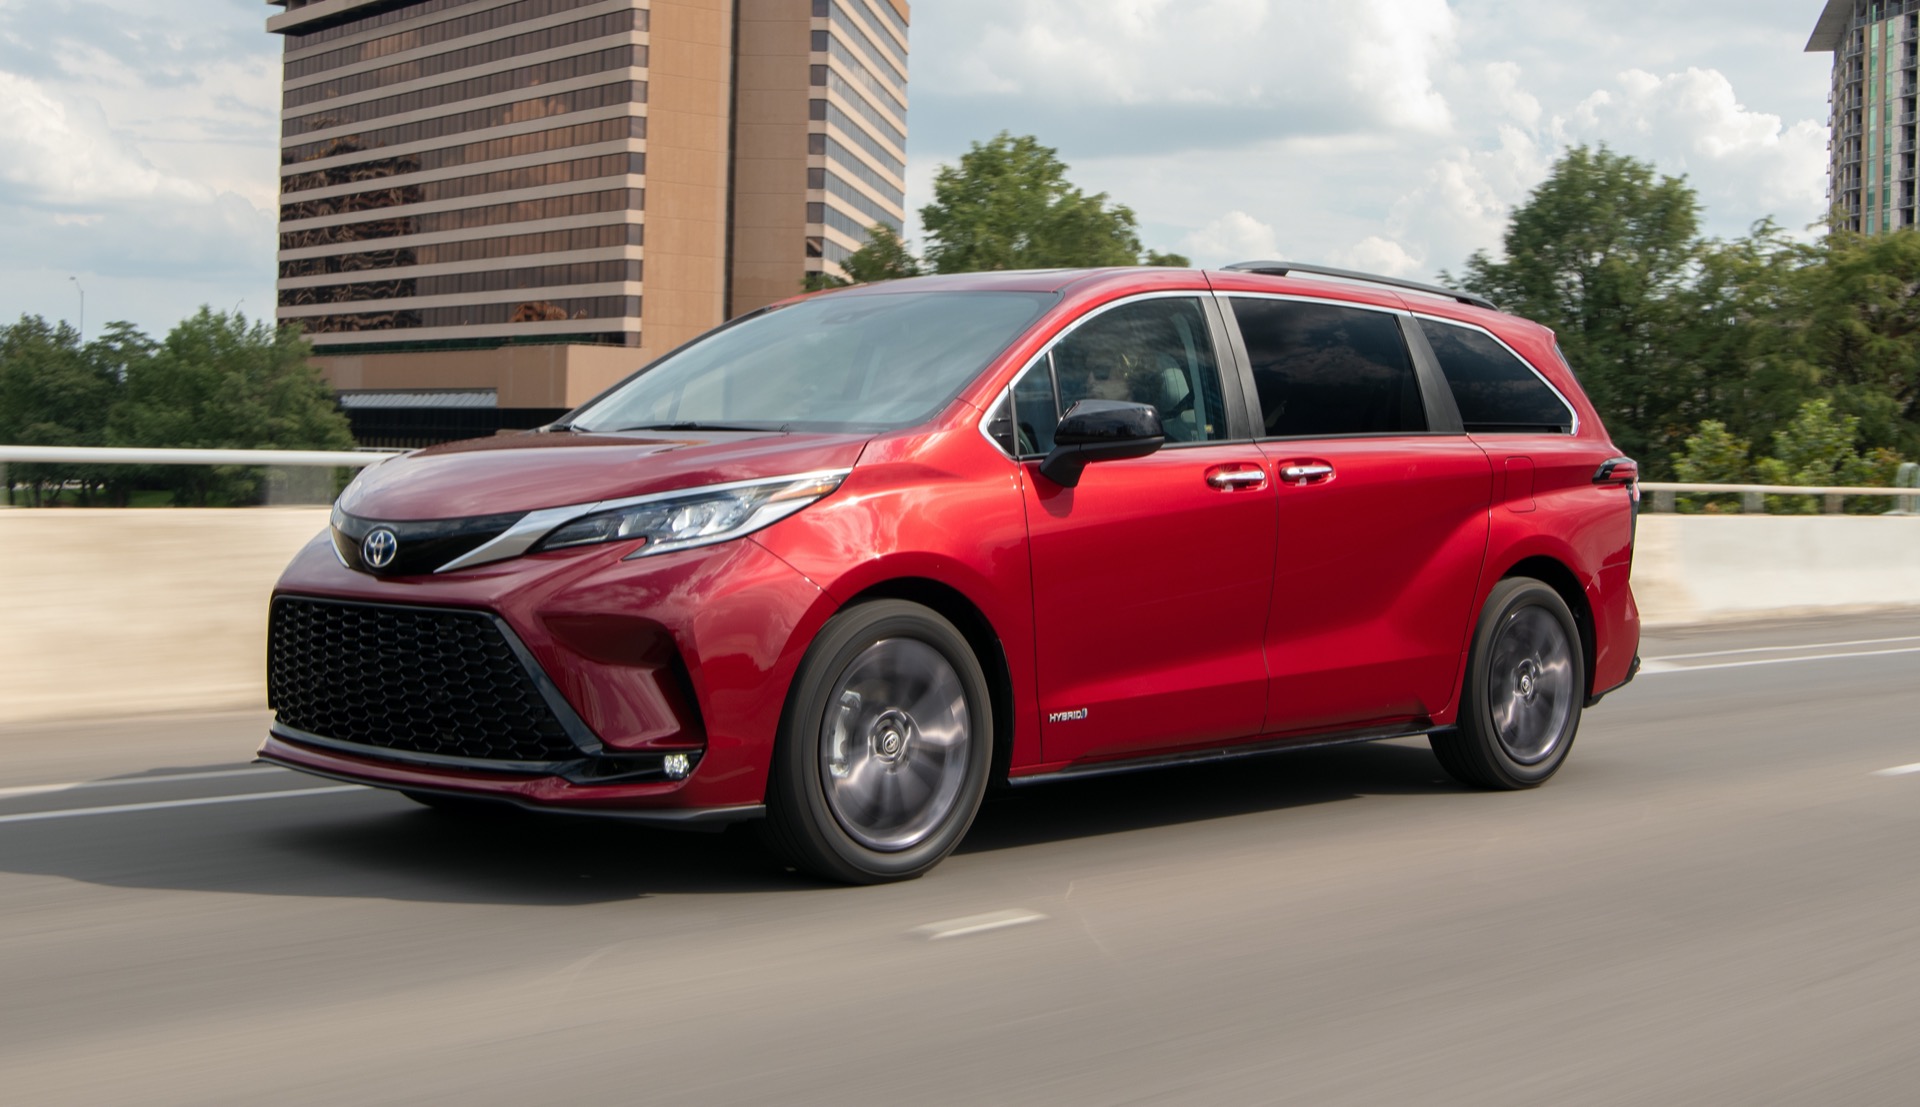 2021 Toyota Sienna priced and driven, 2020 GLS 580 tested: What's New ...